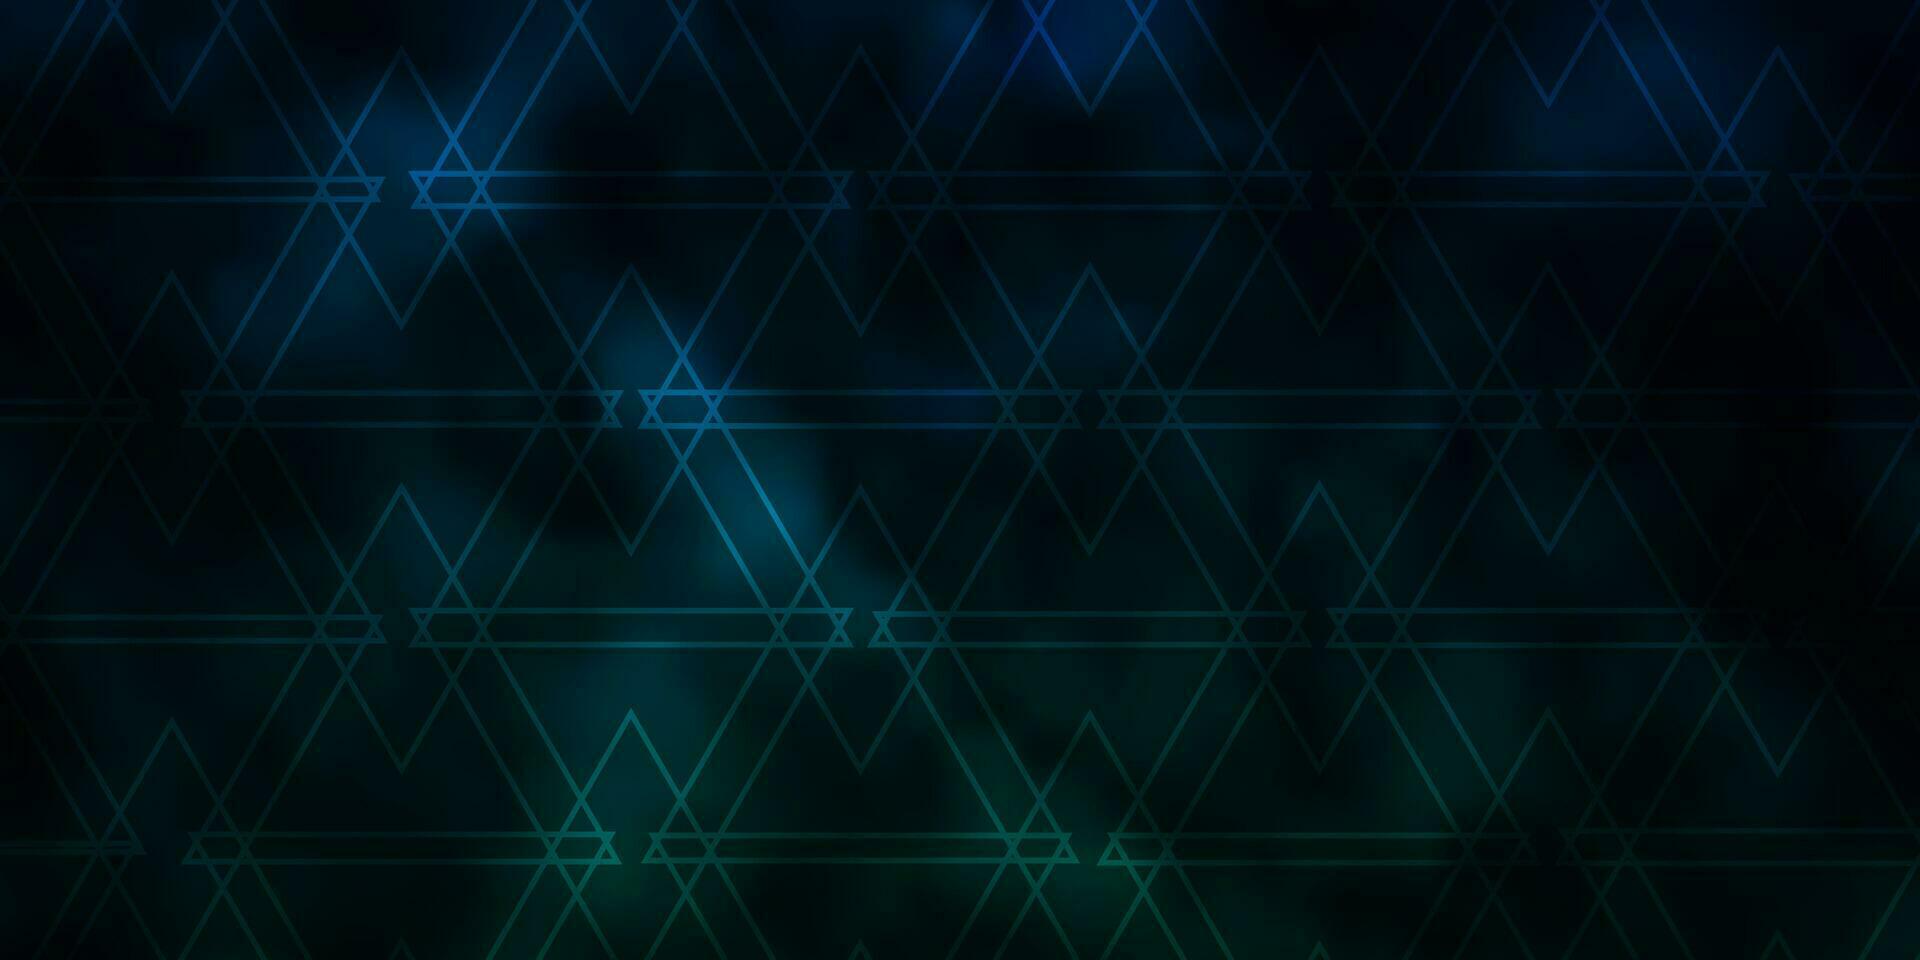 Dark Blue, Green vector pattern with lines, triangles.